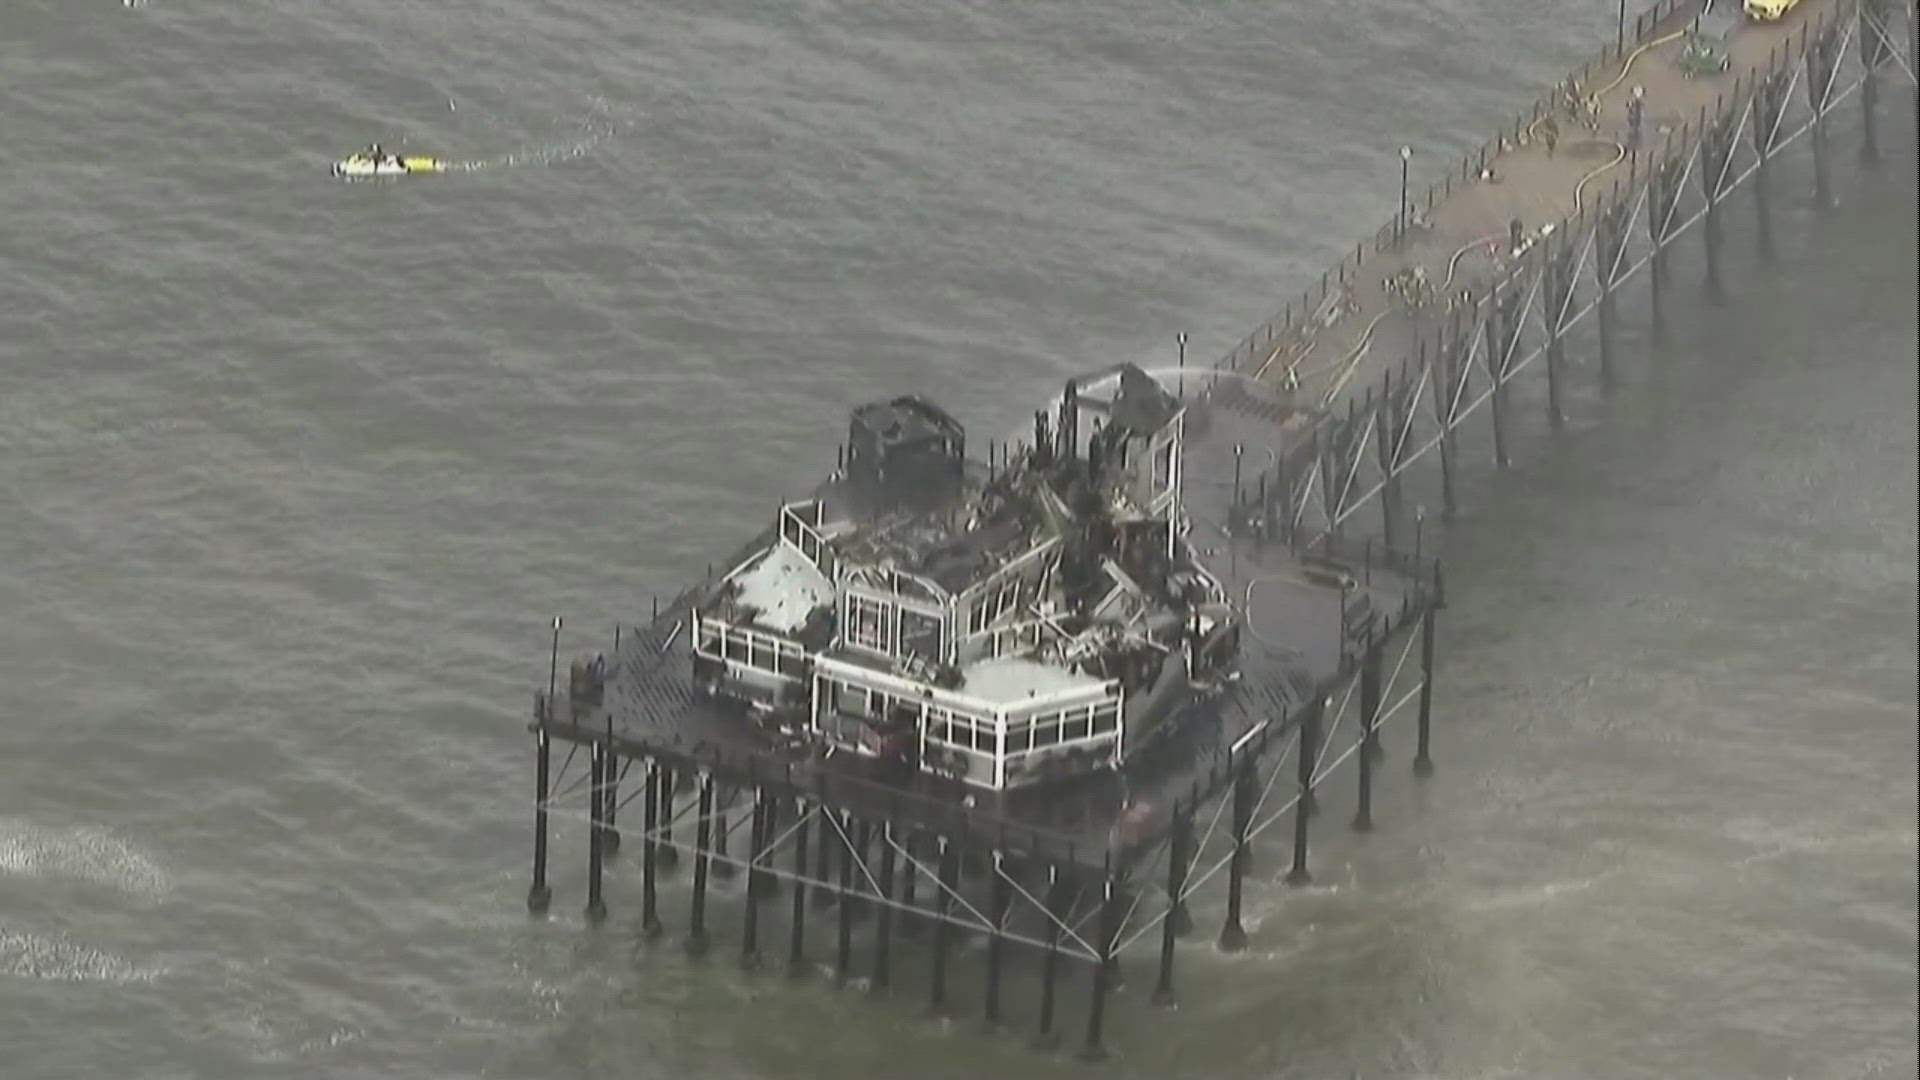 Oceanside mayor says the city is 100% committed to rebuilding historic pier damaged by fire.